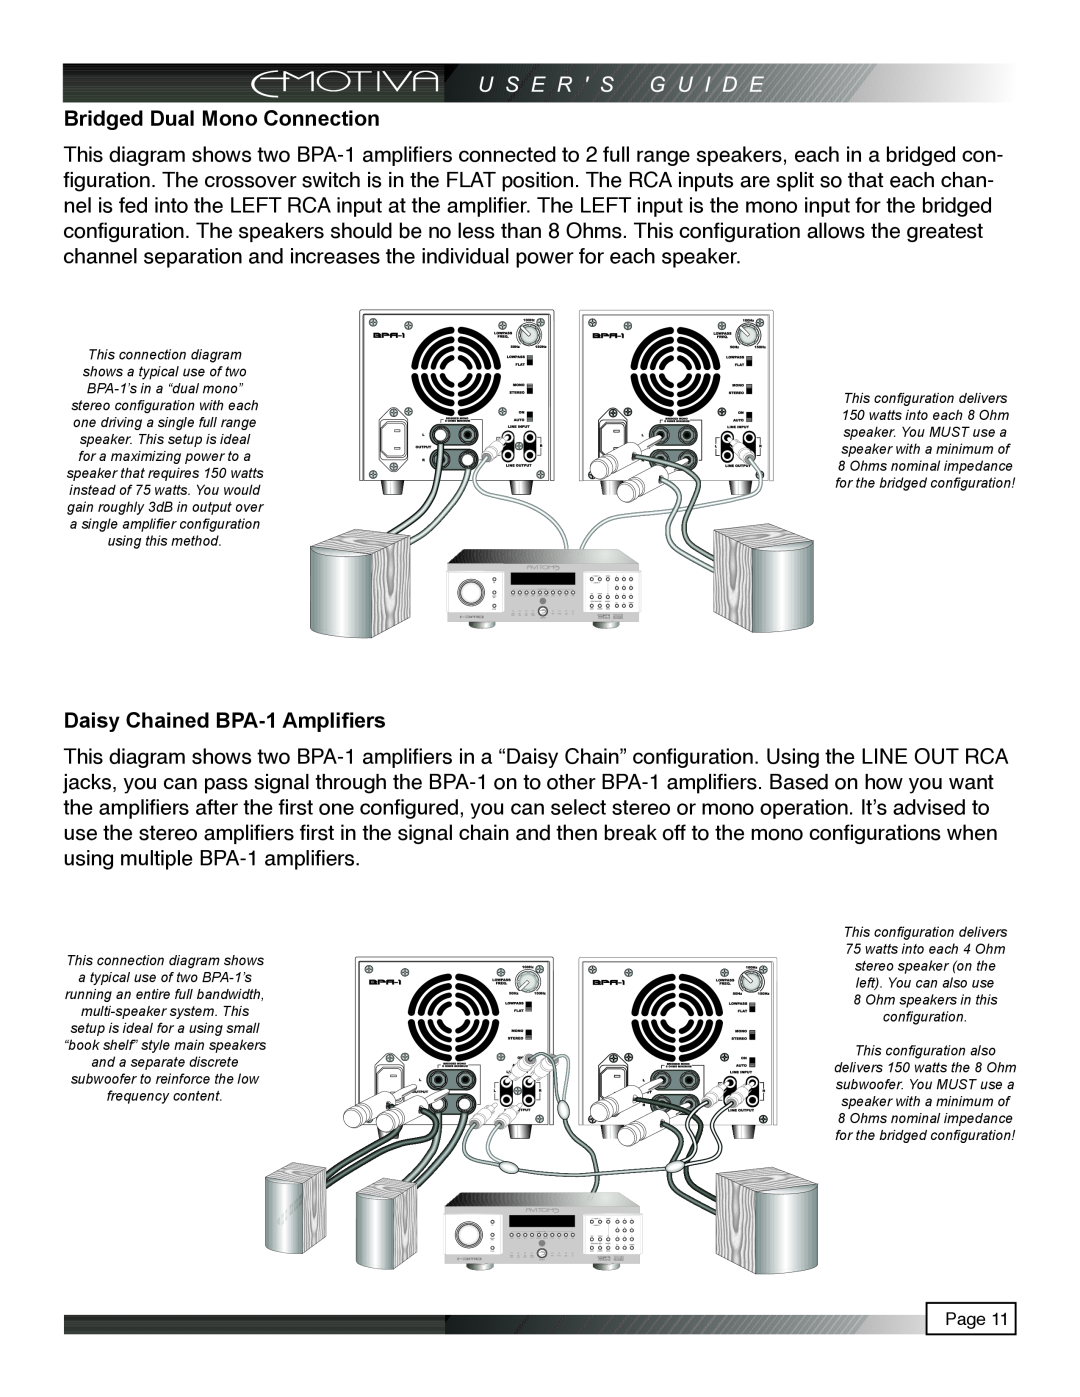 Emotiva pmn manual Bridged Dual Mono Connection, Daisy Chained BPA-1Amplifiers, This connection diagram shows 